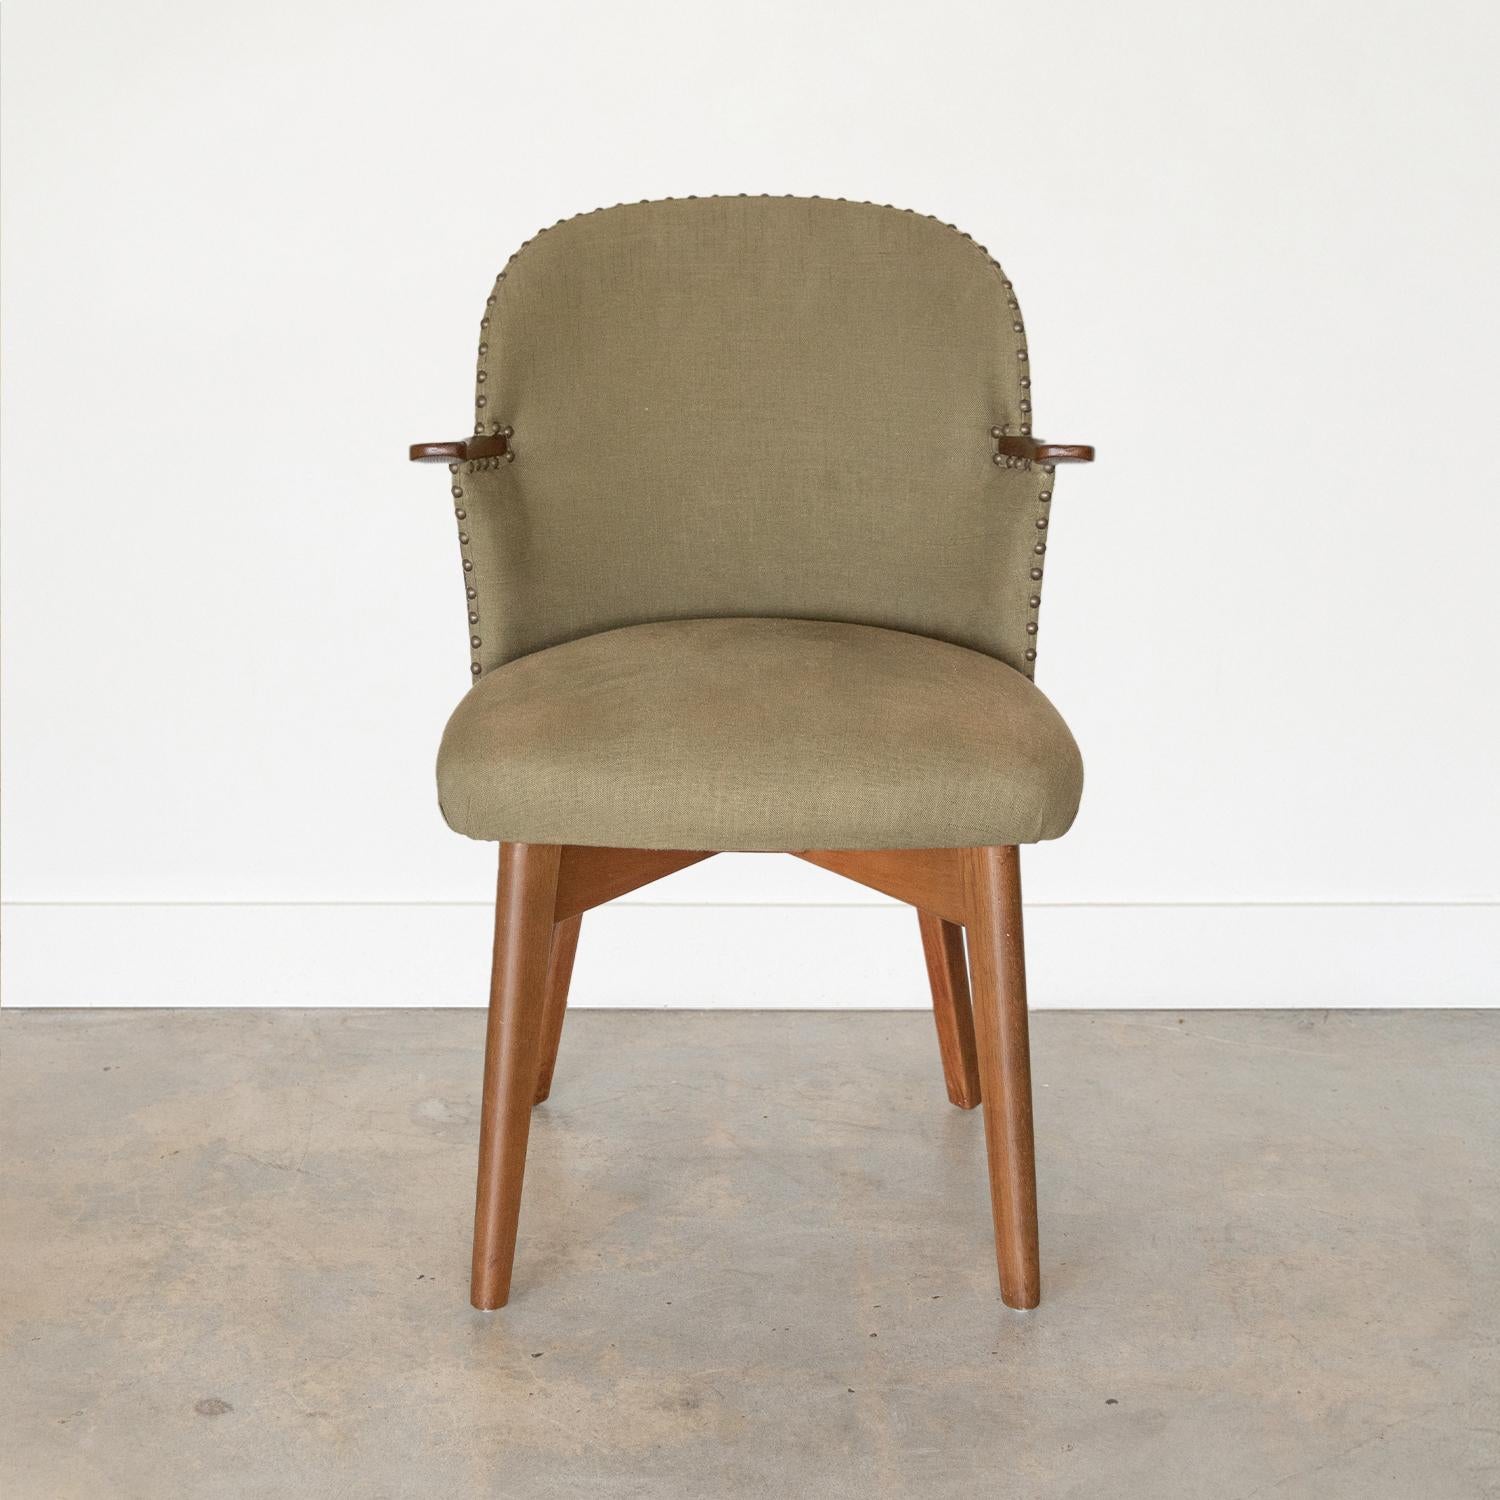 20th Century 1960's Linen and Wood Chair For Sale